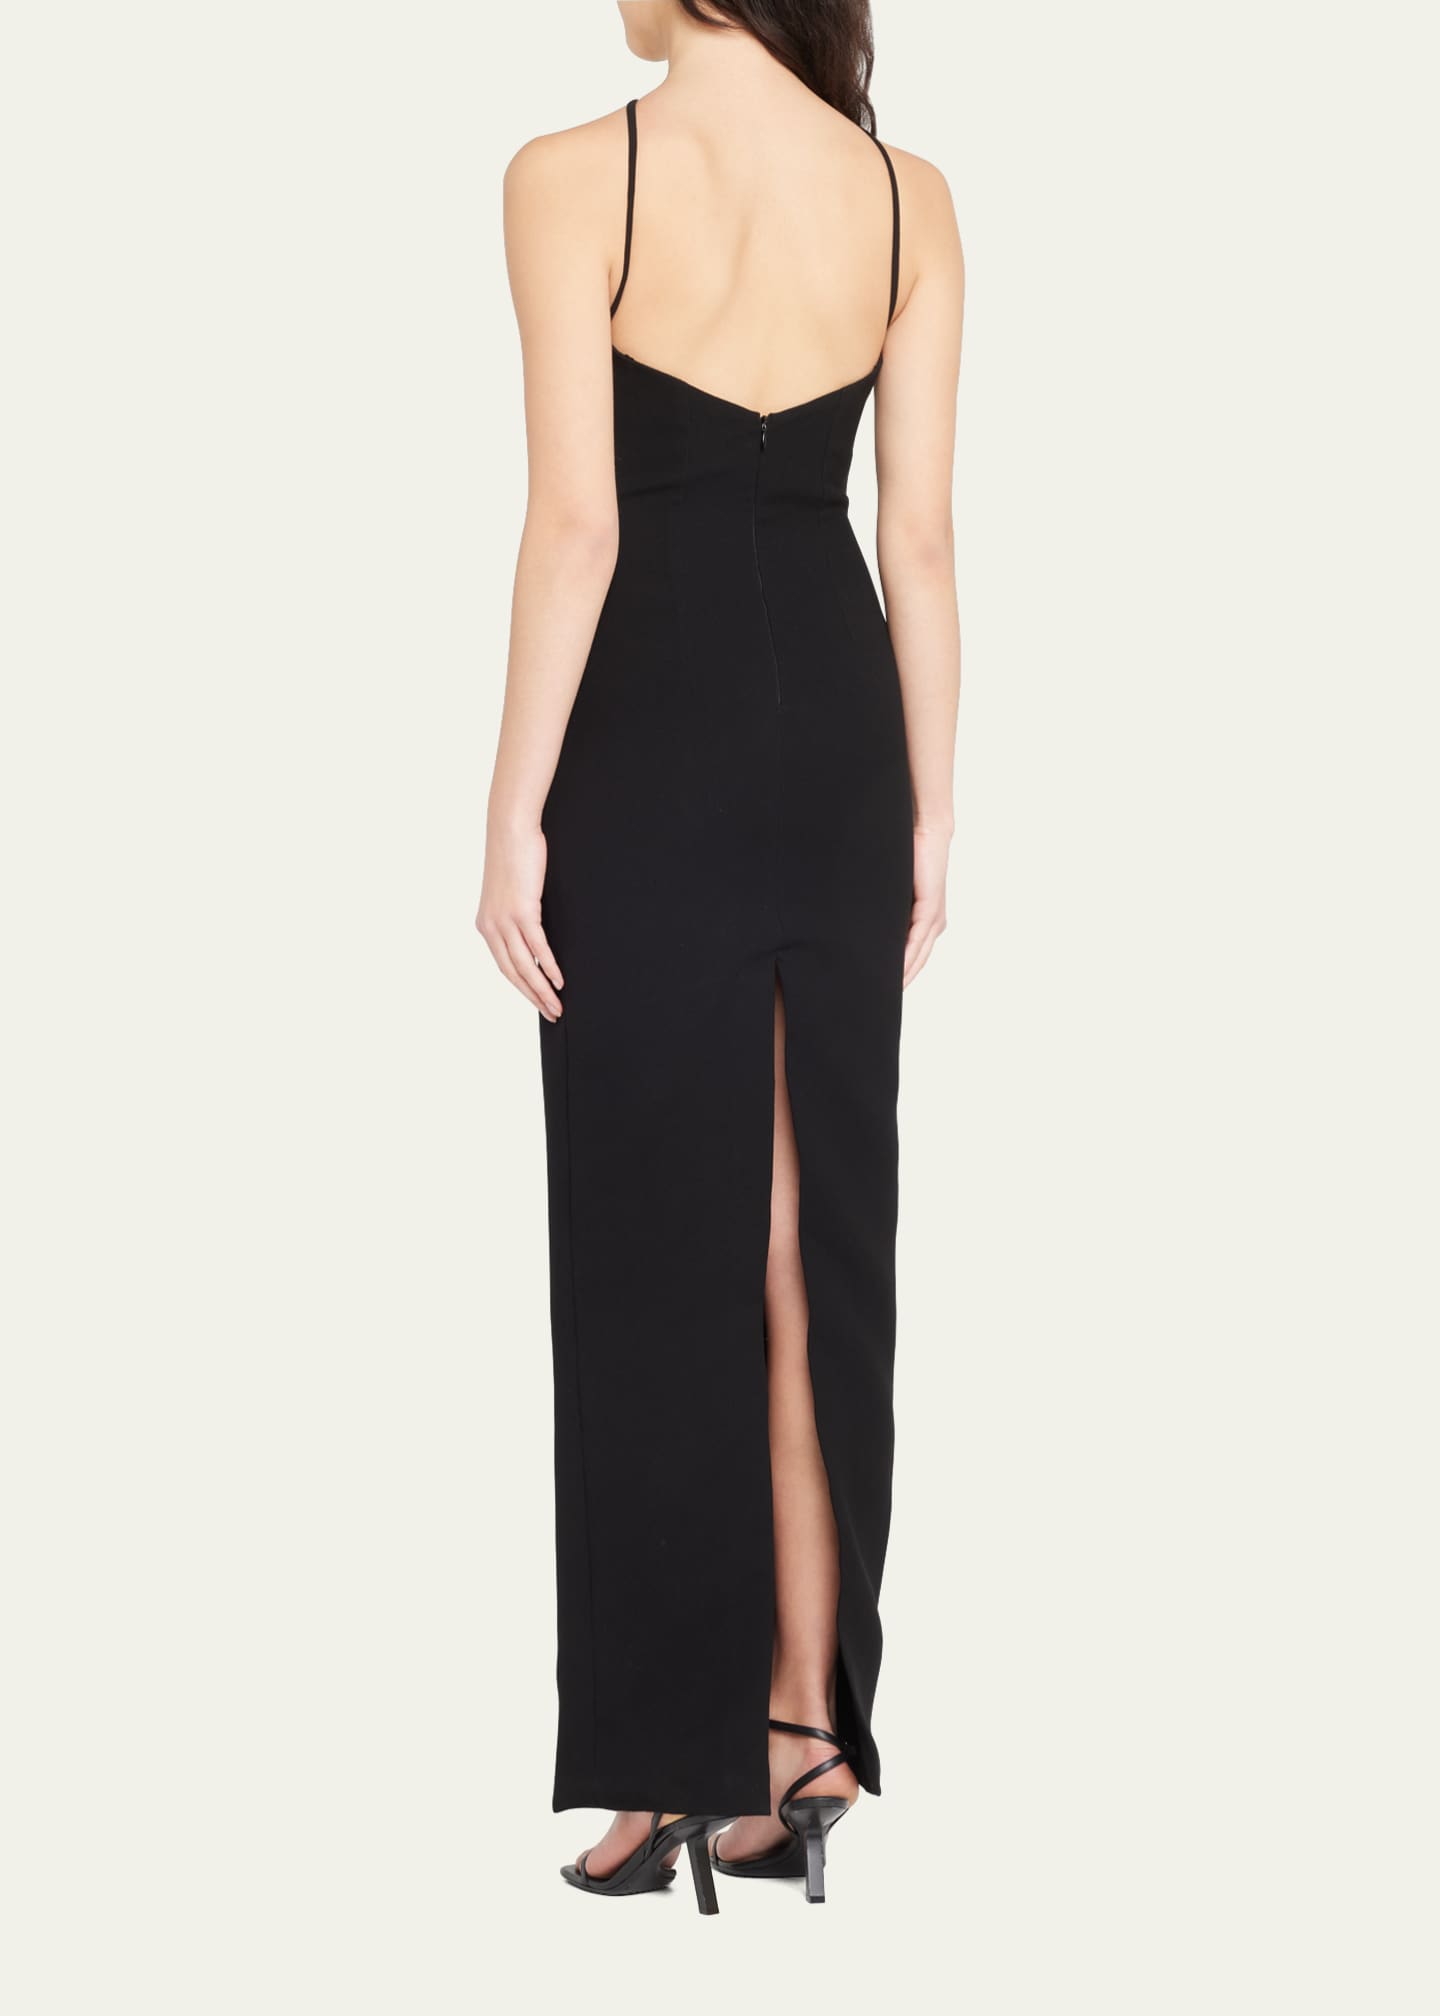 MONOT Halter Gown with Front Cutouts - Bergdorf Goodman